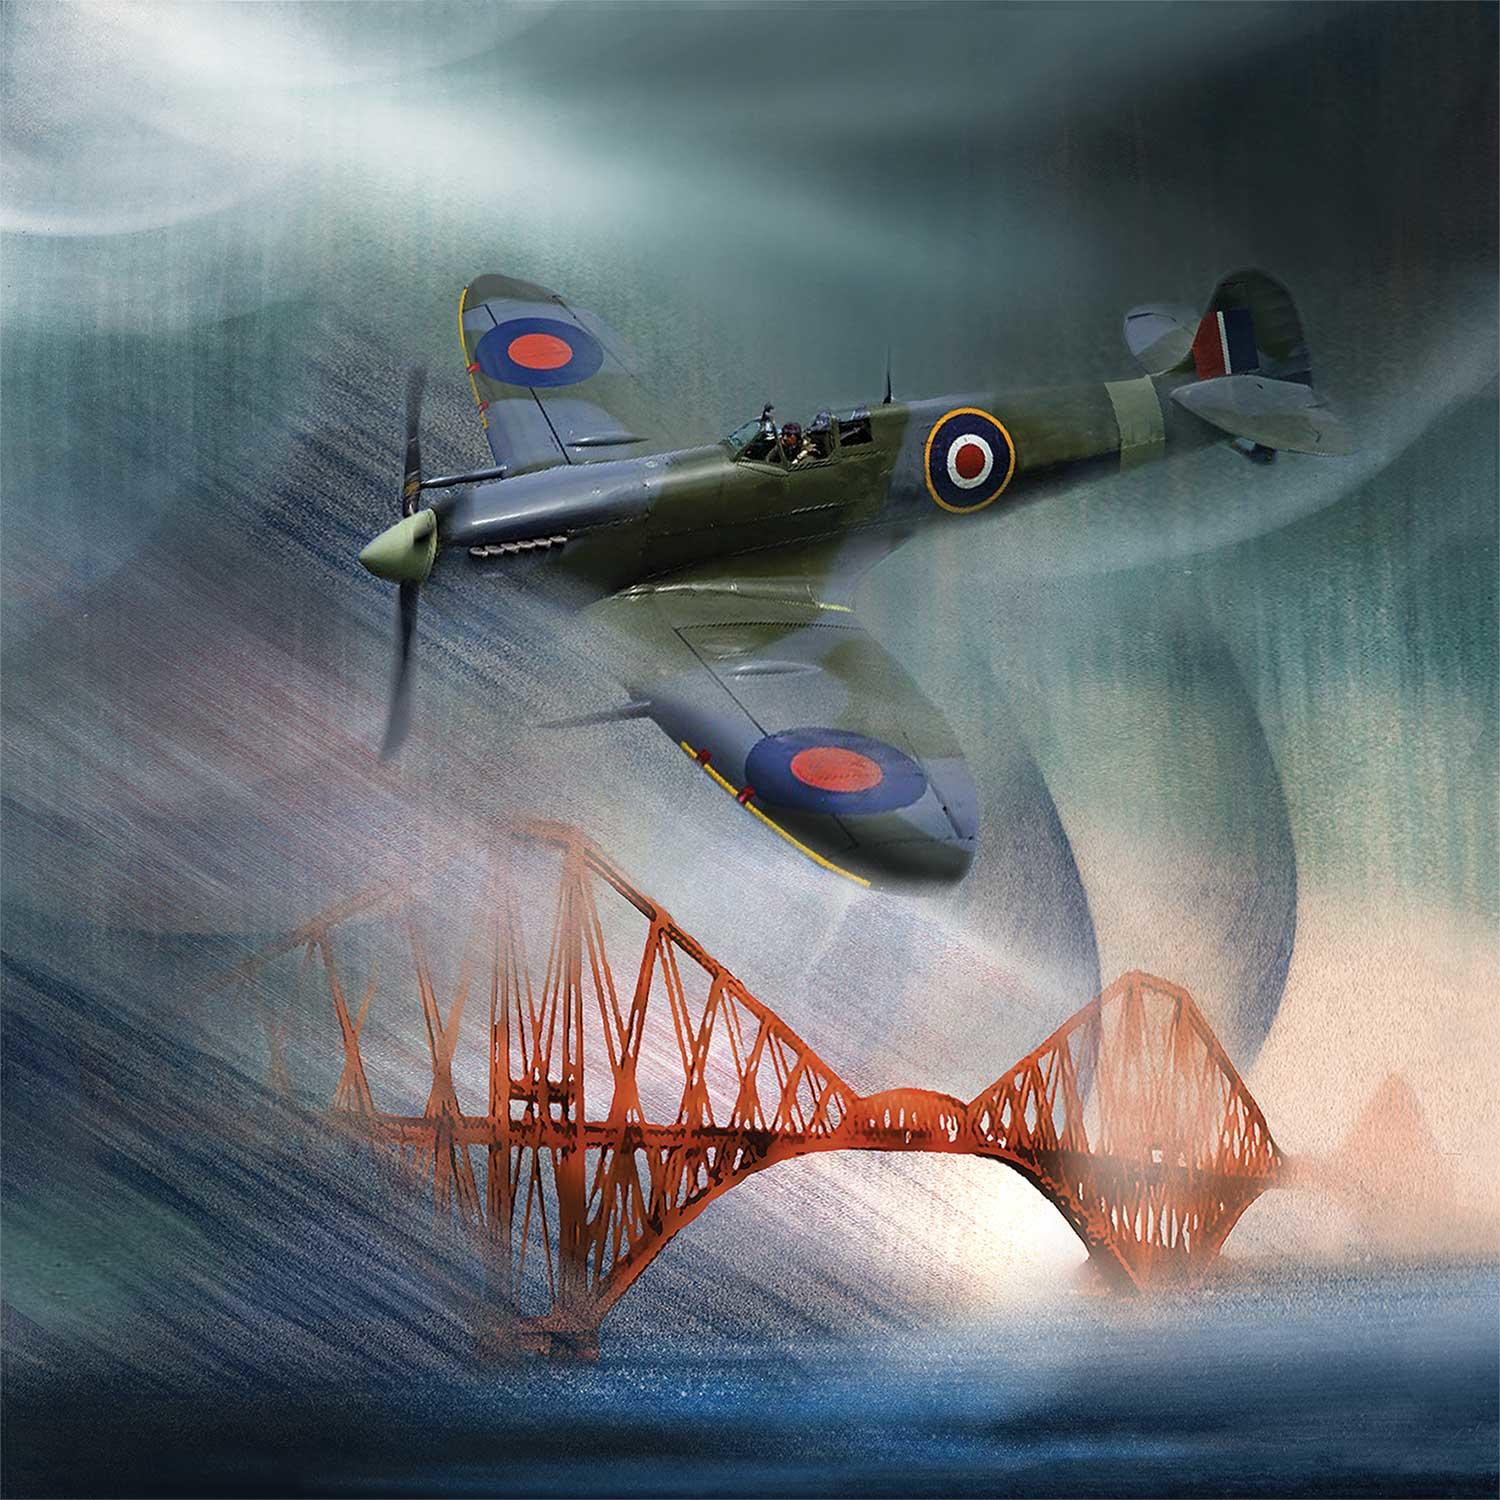 Spitfire Over Forth Bridge, Fife by Esther Cohen